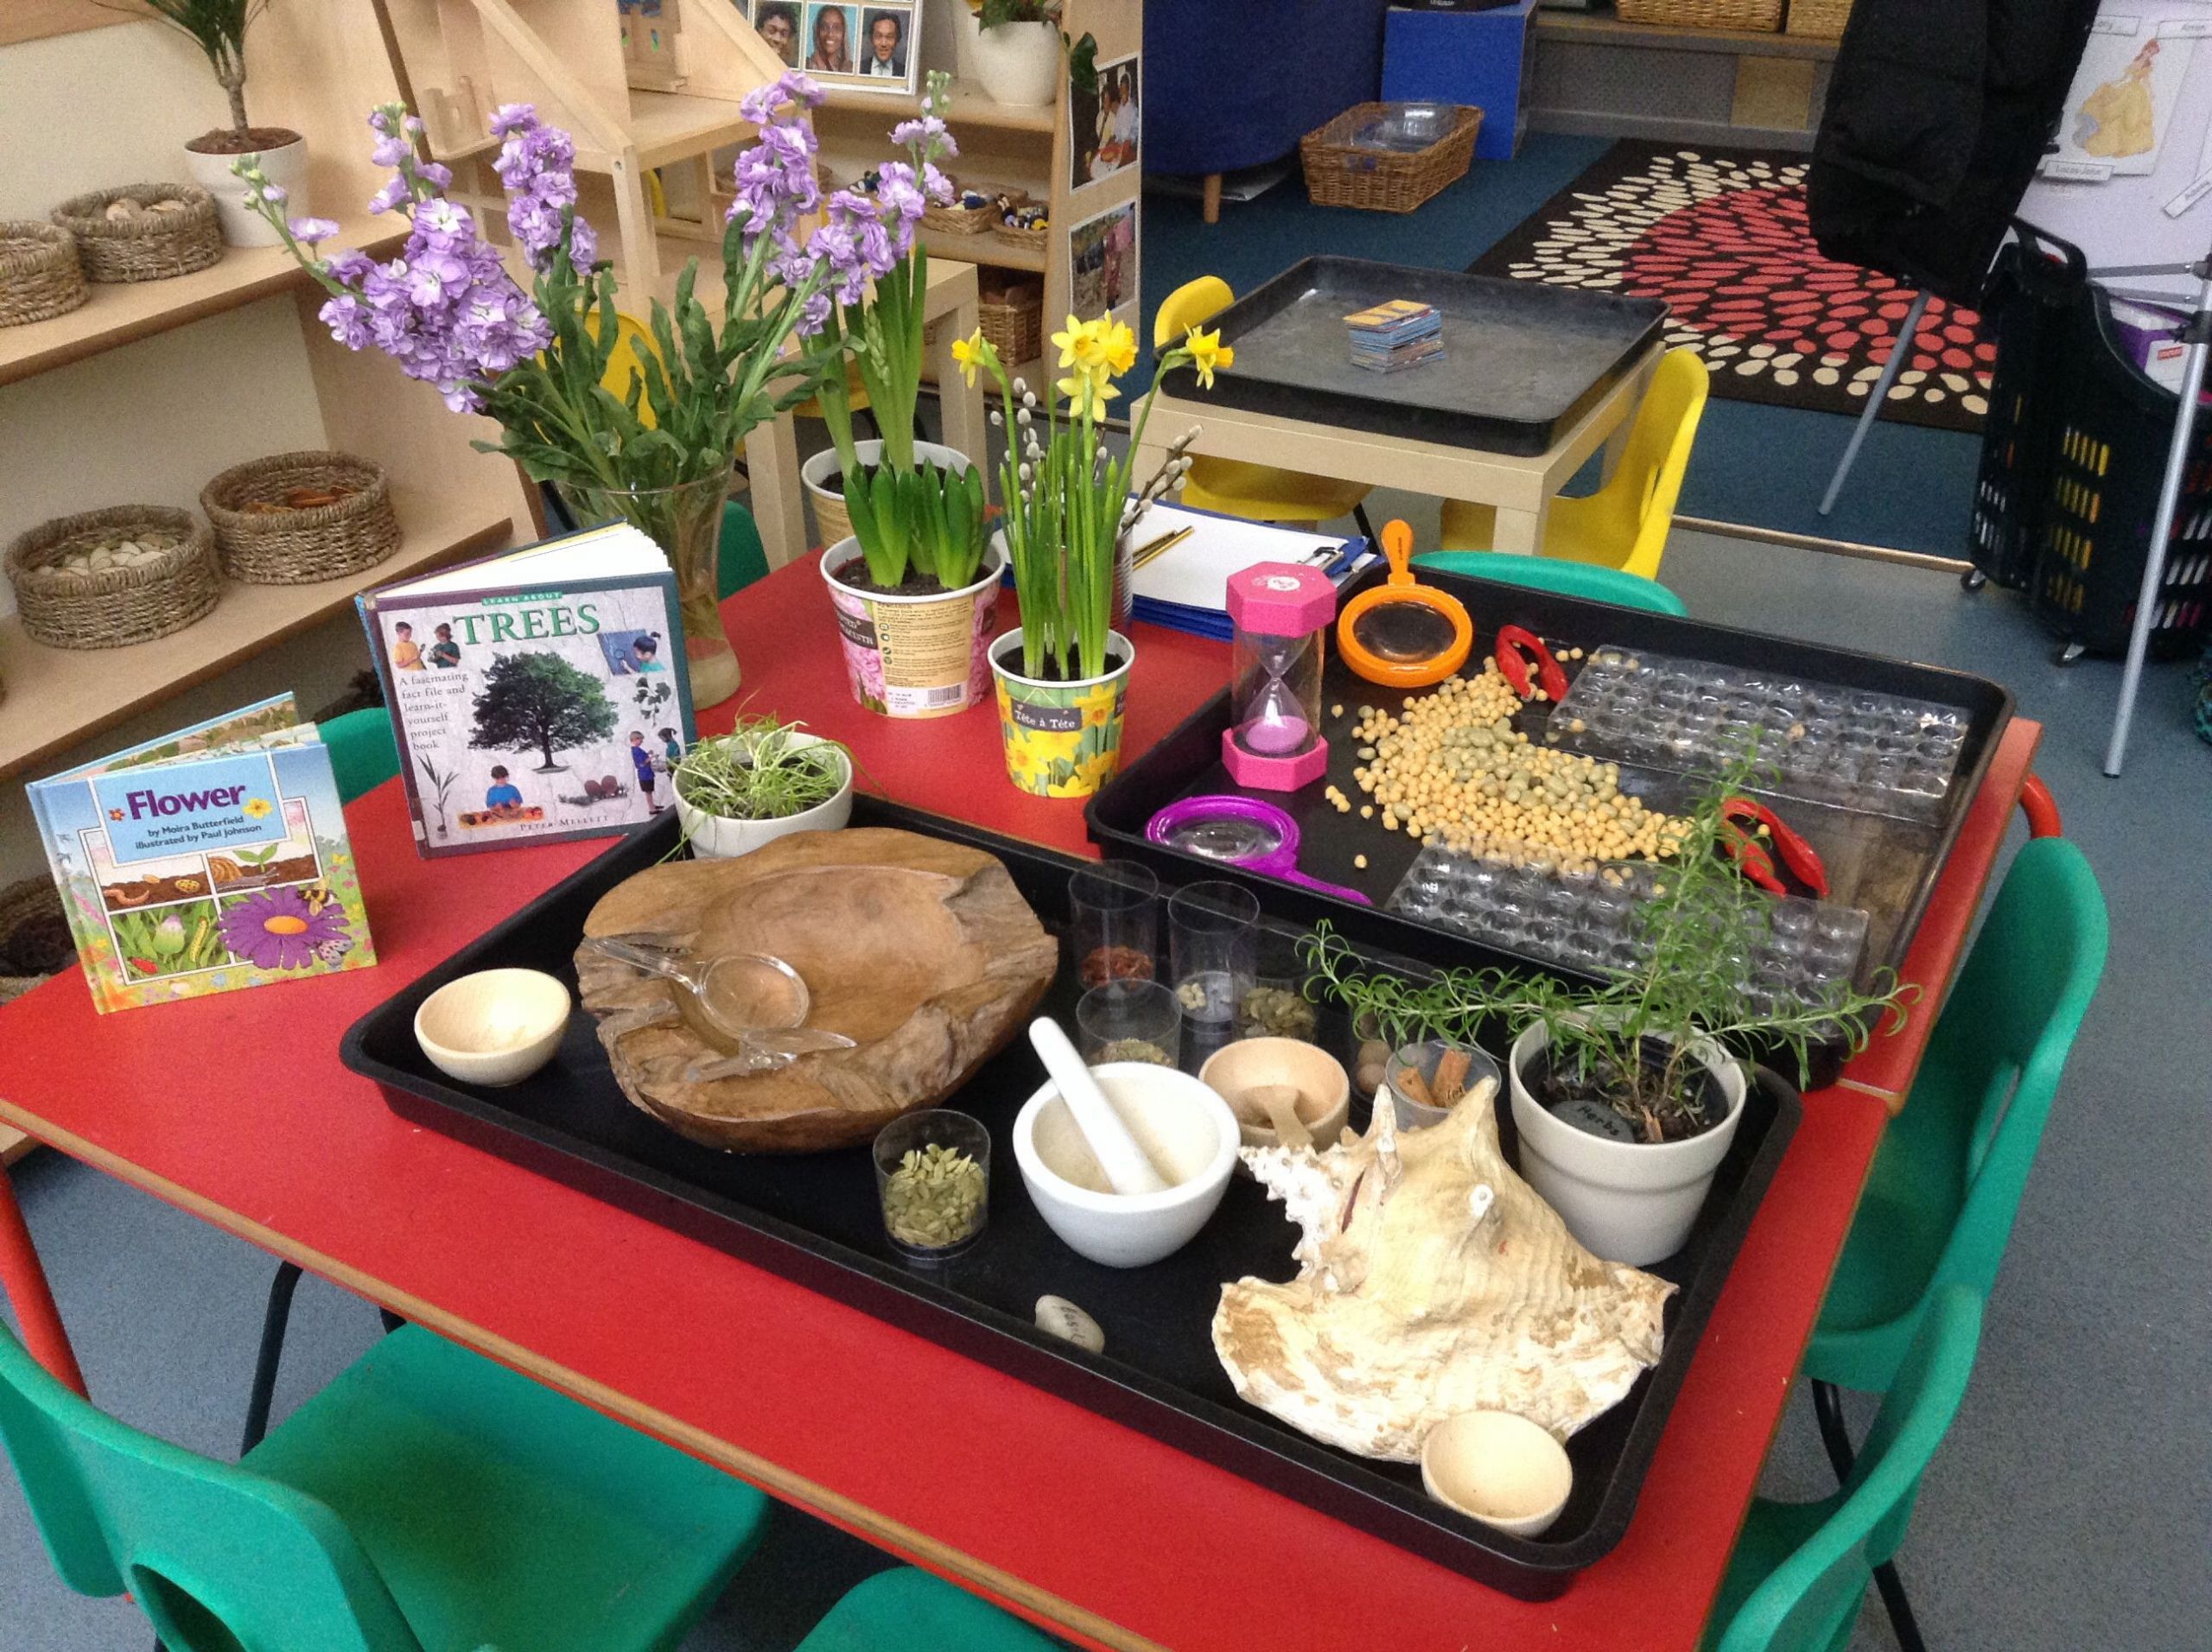 Spring Ideas Eyfs
 Herb investigation bean sorting and natural plants